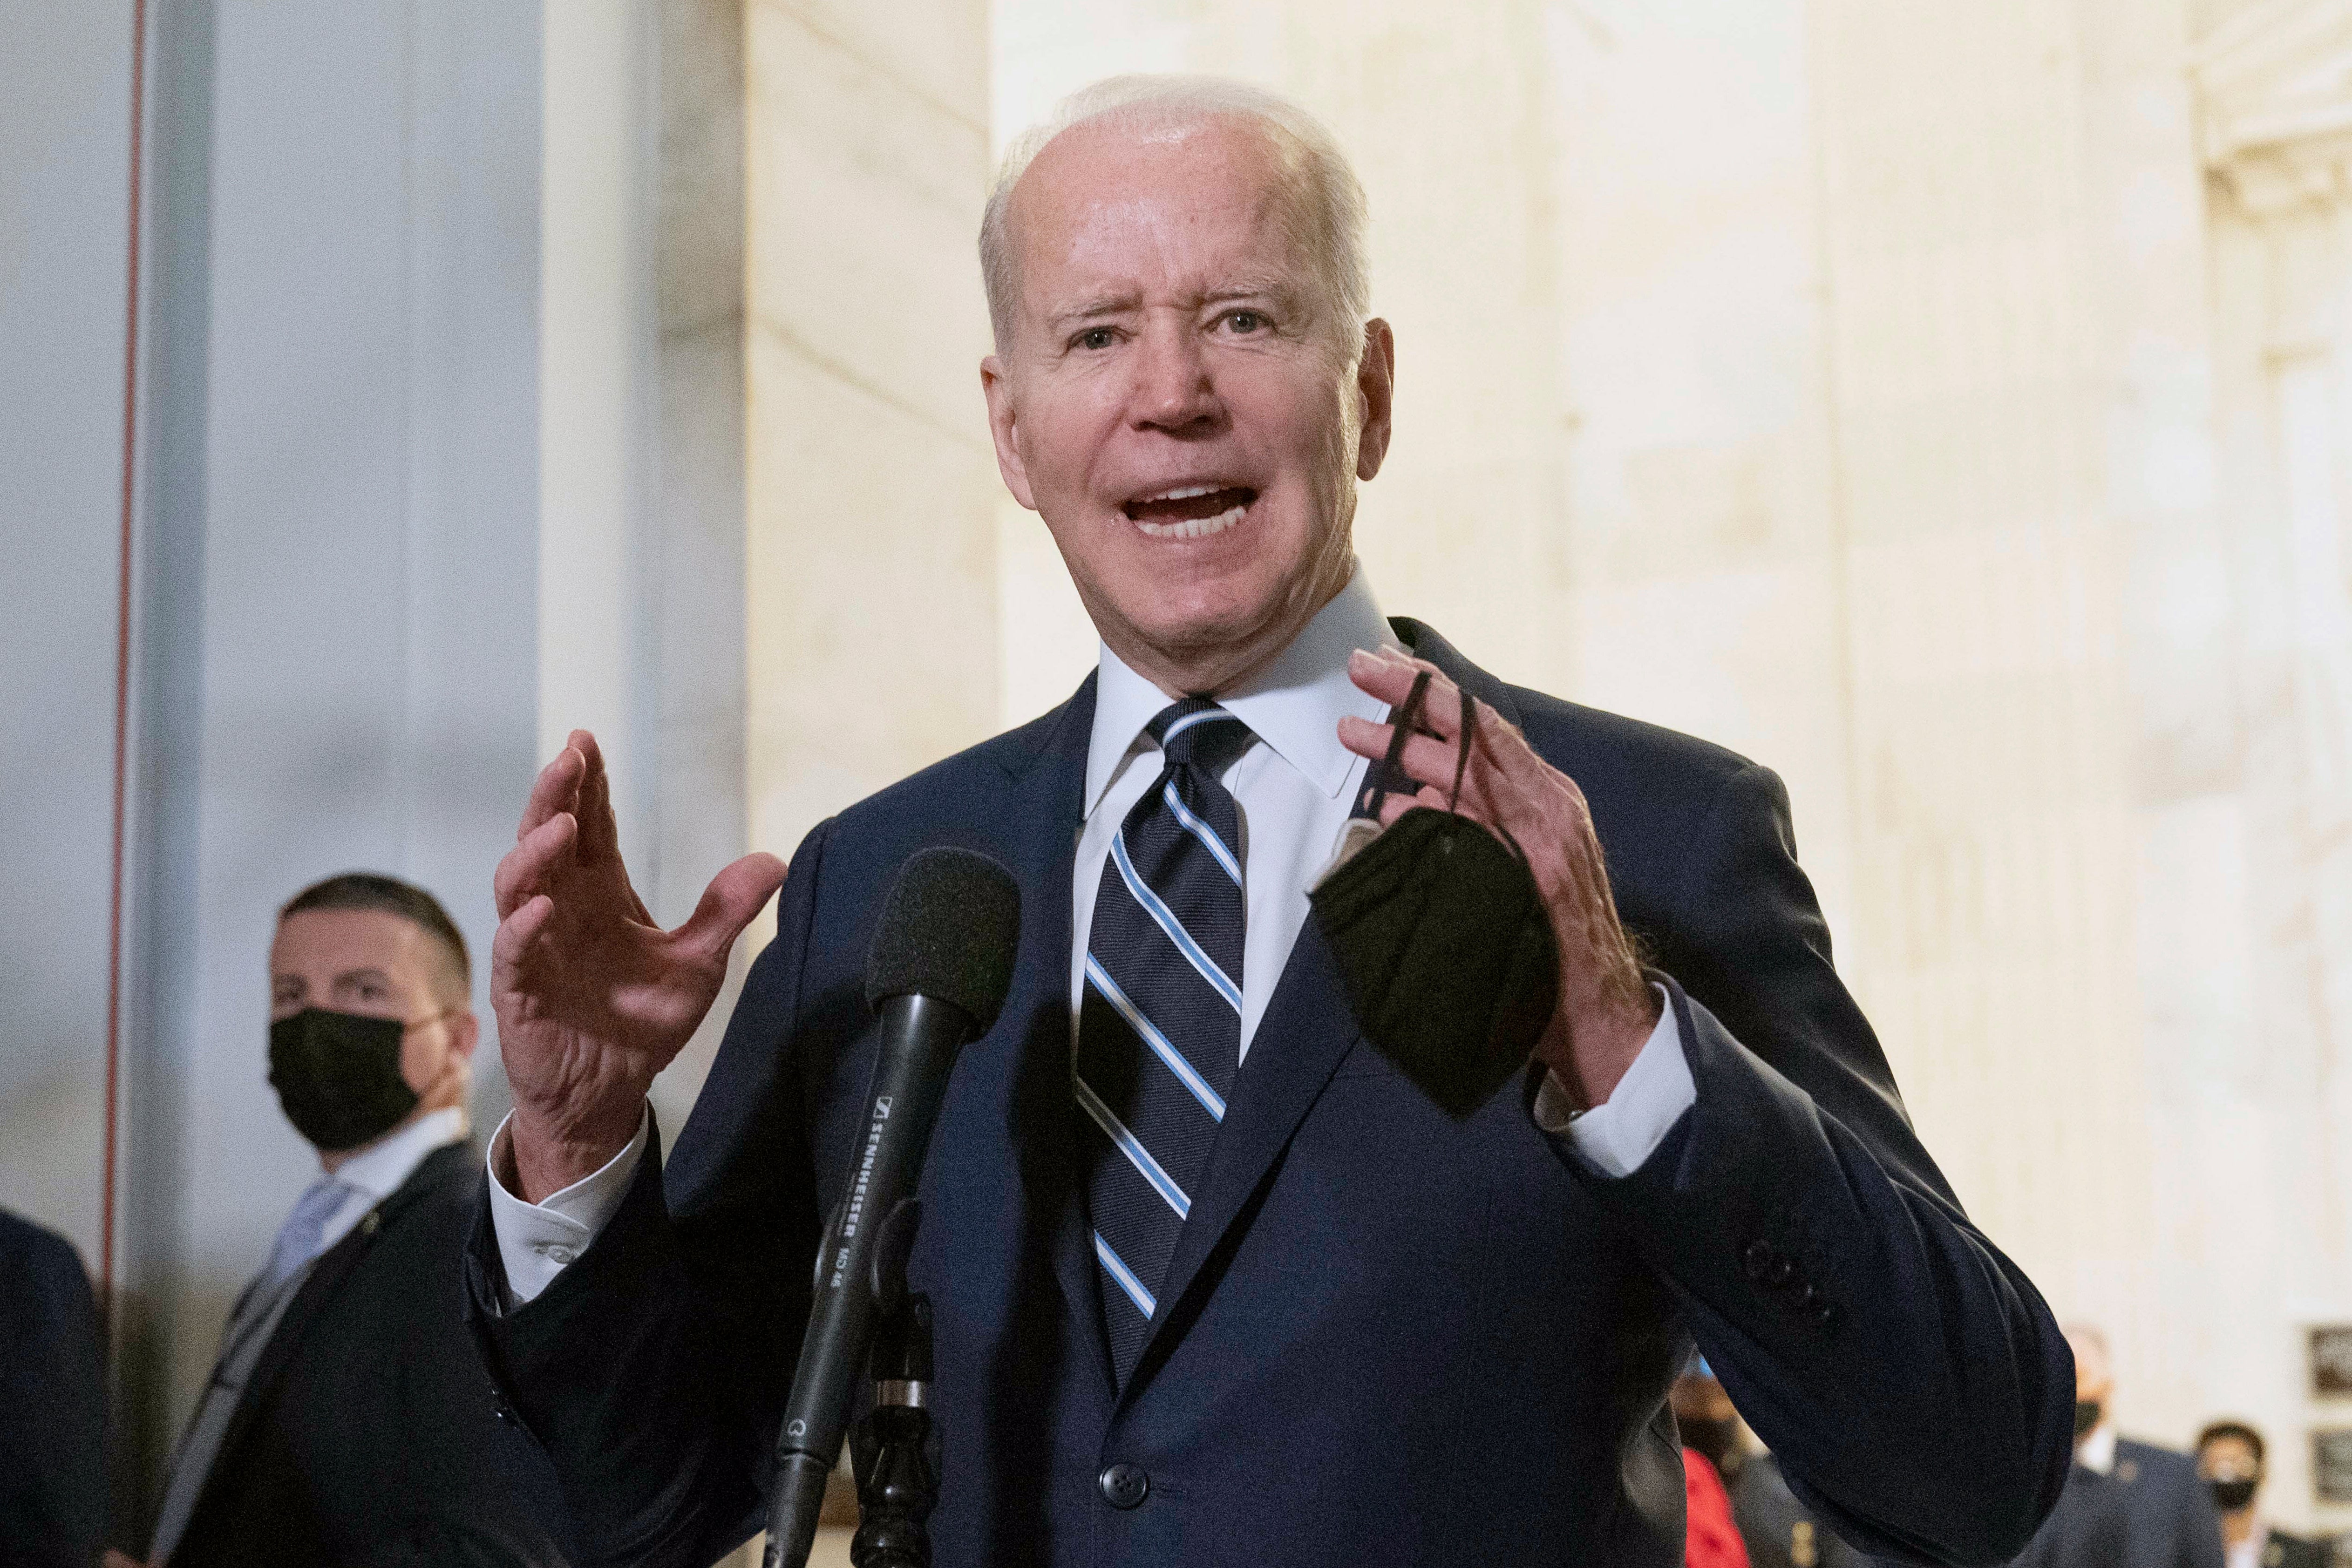 President Biden’s approval rating has been on a consistent downward trend from the day he took office